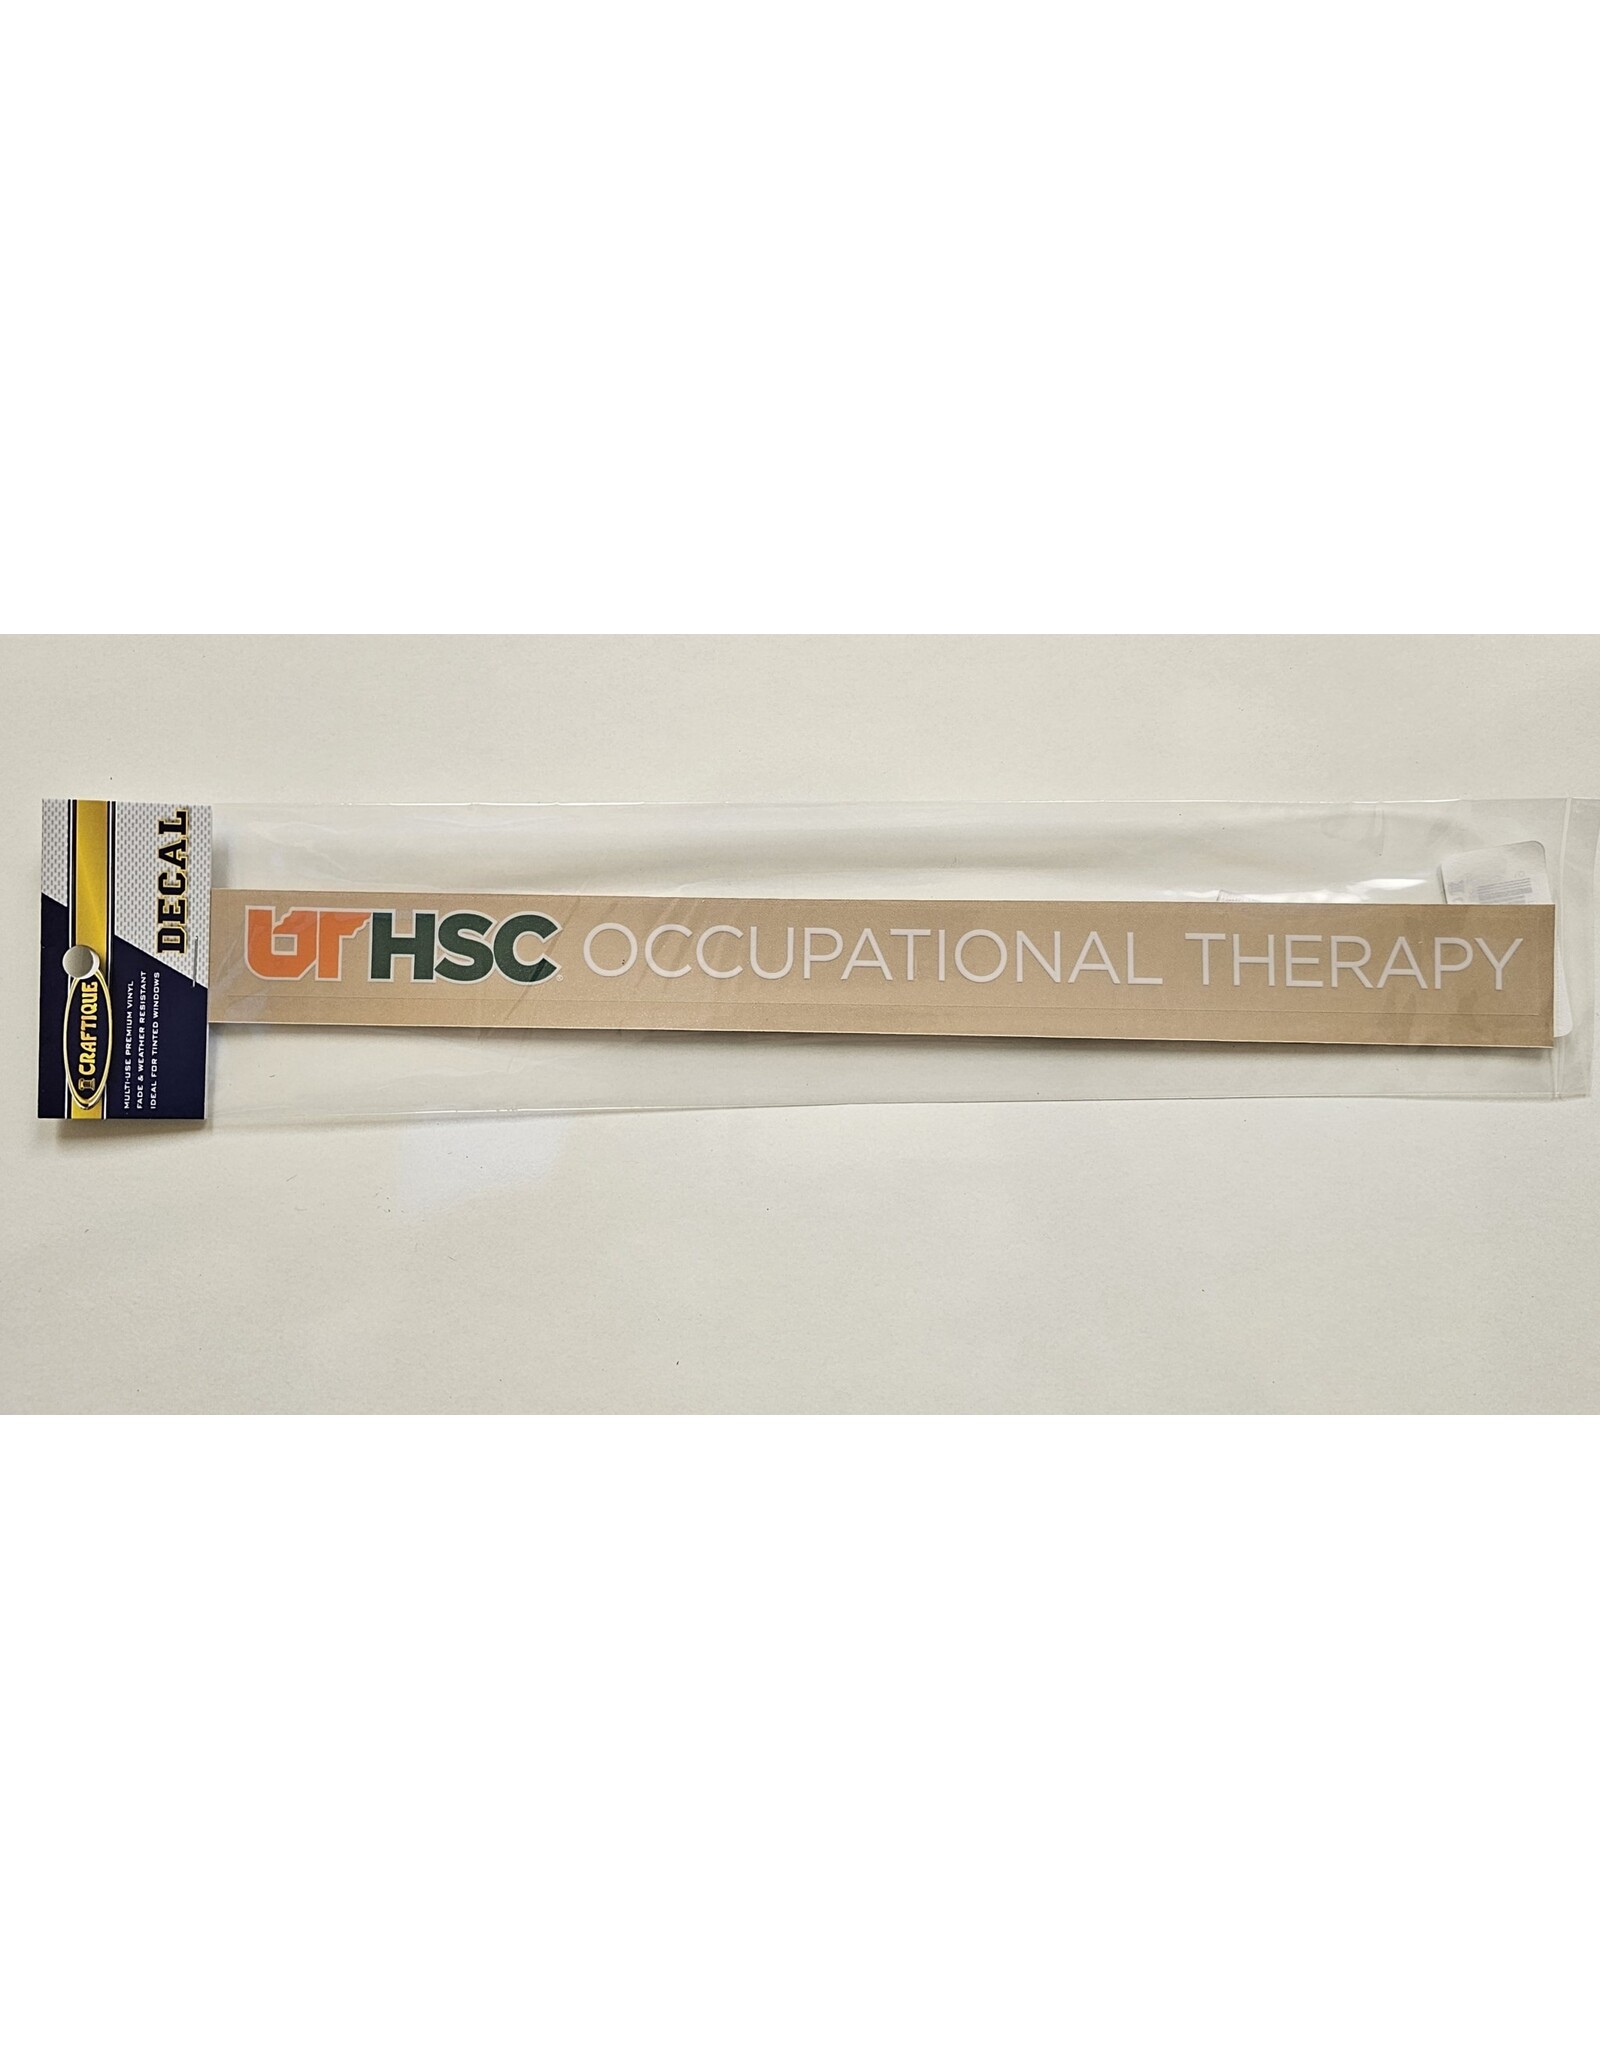 CRAFTIQUE OCCUPATIONAL THERAPY DECAL 12"